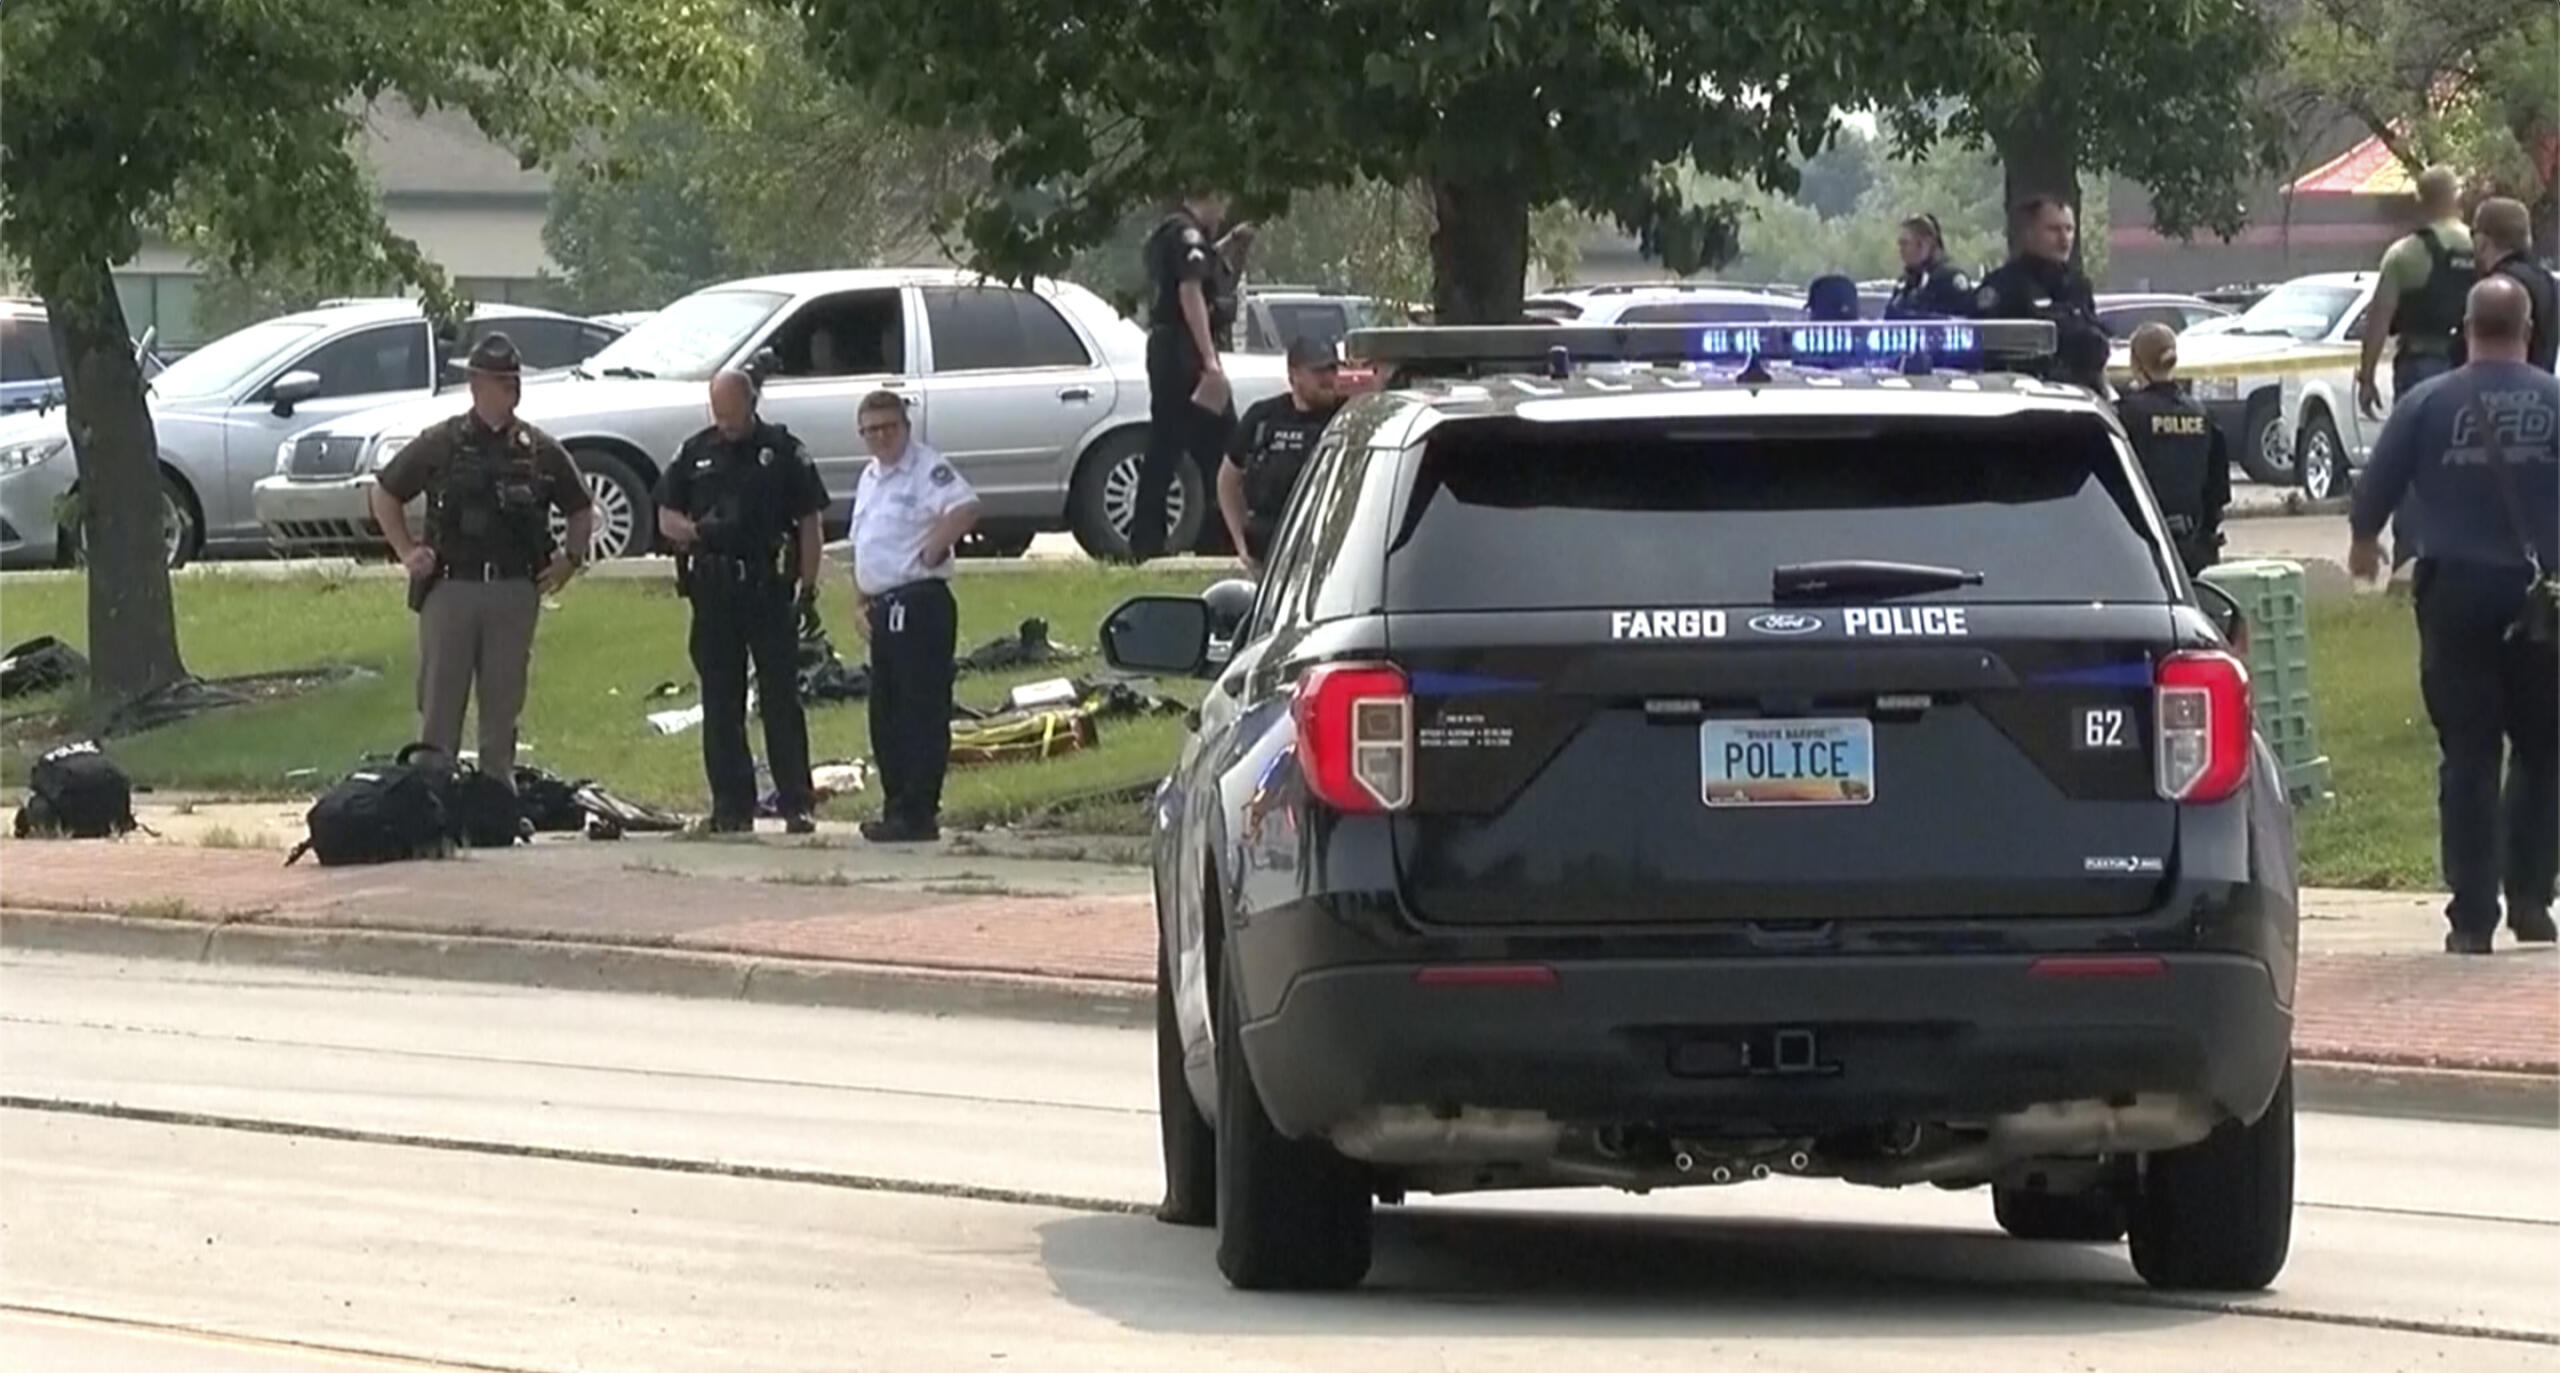 In this image from video, law enforcement officers work at the scene of a shooting Friday, July 14, 2023, in Fargo, N.D. One police officer died and two others were critically injured in the shooting that also killed the suspect, police said. The shooting happened before 3 p.m. on a busy street. Multiple witnesses said a man opened fire on police officers before other officers shot the suspect. In a statement late Friday, police said a civilian also was seriously wounded.